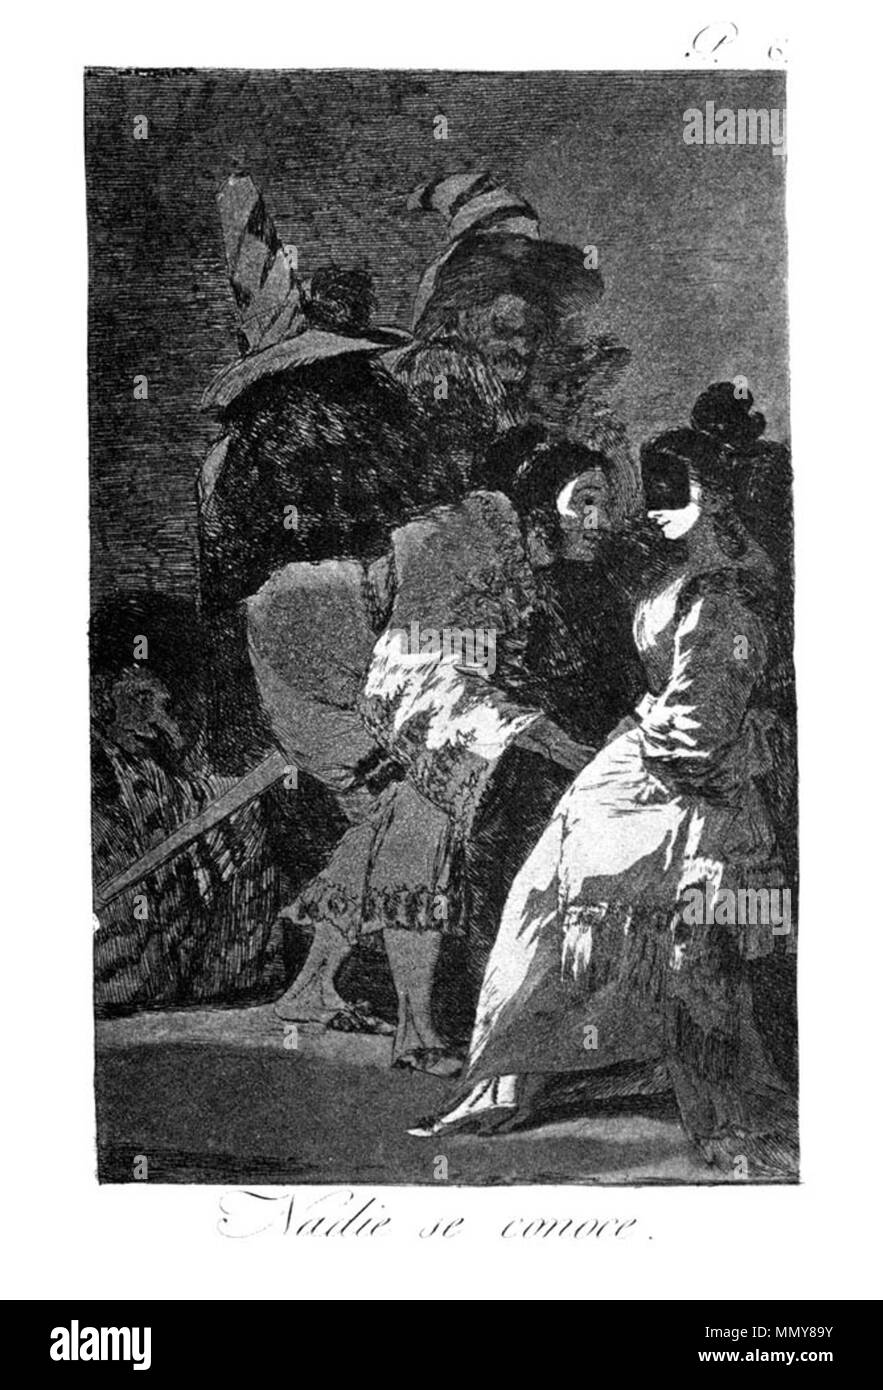 . Los Caprichos is a set of 80 aquatint prints created by Francisco Goya for release in 1799.  . 1799.   Francisco Goya  (1746–1828)      Alternative names Francisco Goya Lucientes, Francisco de Goya y Lucientes, Francisco José Goya Lucientes  Description Spanish painter, printmaker, lithographer, engraver and etcher  Date of birth/death 30 March 1746 16 April 1828  Location of birth/death Fuendetodos Bordeaux  Work location Madrid, Zaragoza, Bordeaux  Authority control  : Q5432 VIAF:?54343141 ISNI:?0000 0001 2280 1608 ULAN:?500118936 LCCN:?n79003363 NLA:?36545788 WorldCat Goya - Caprichos (06 Stock Photo